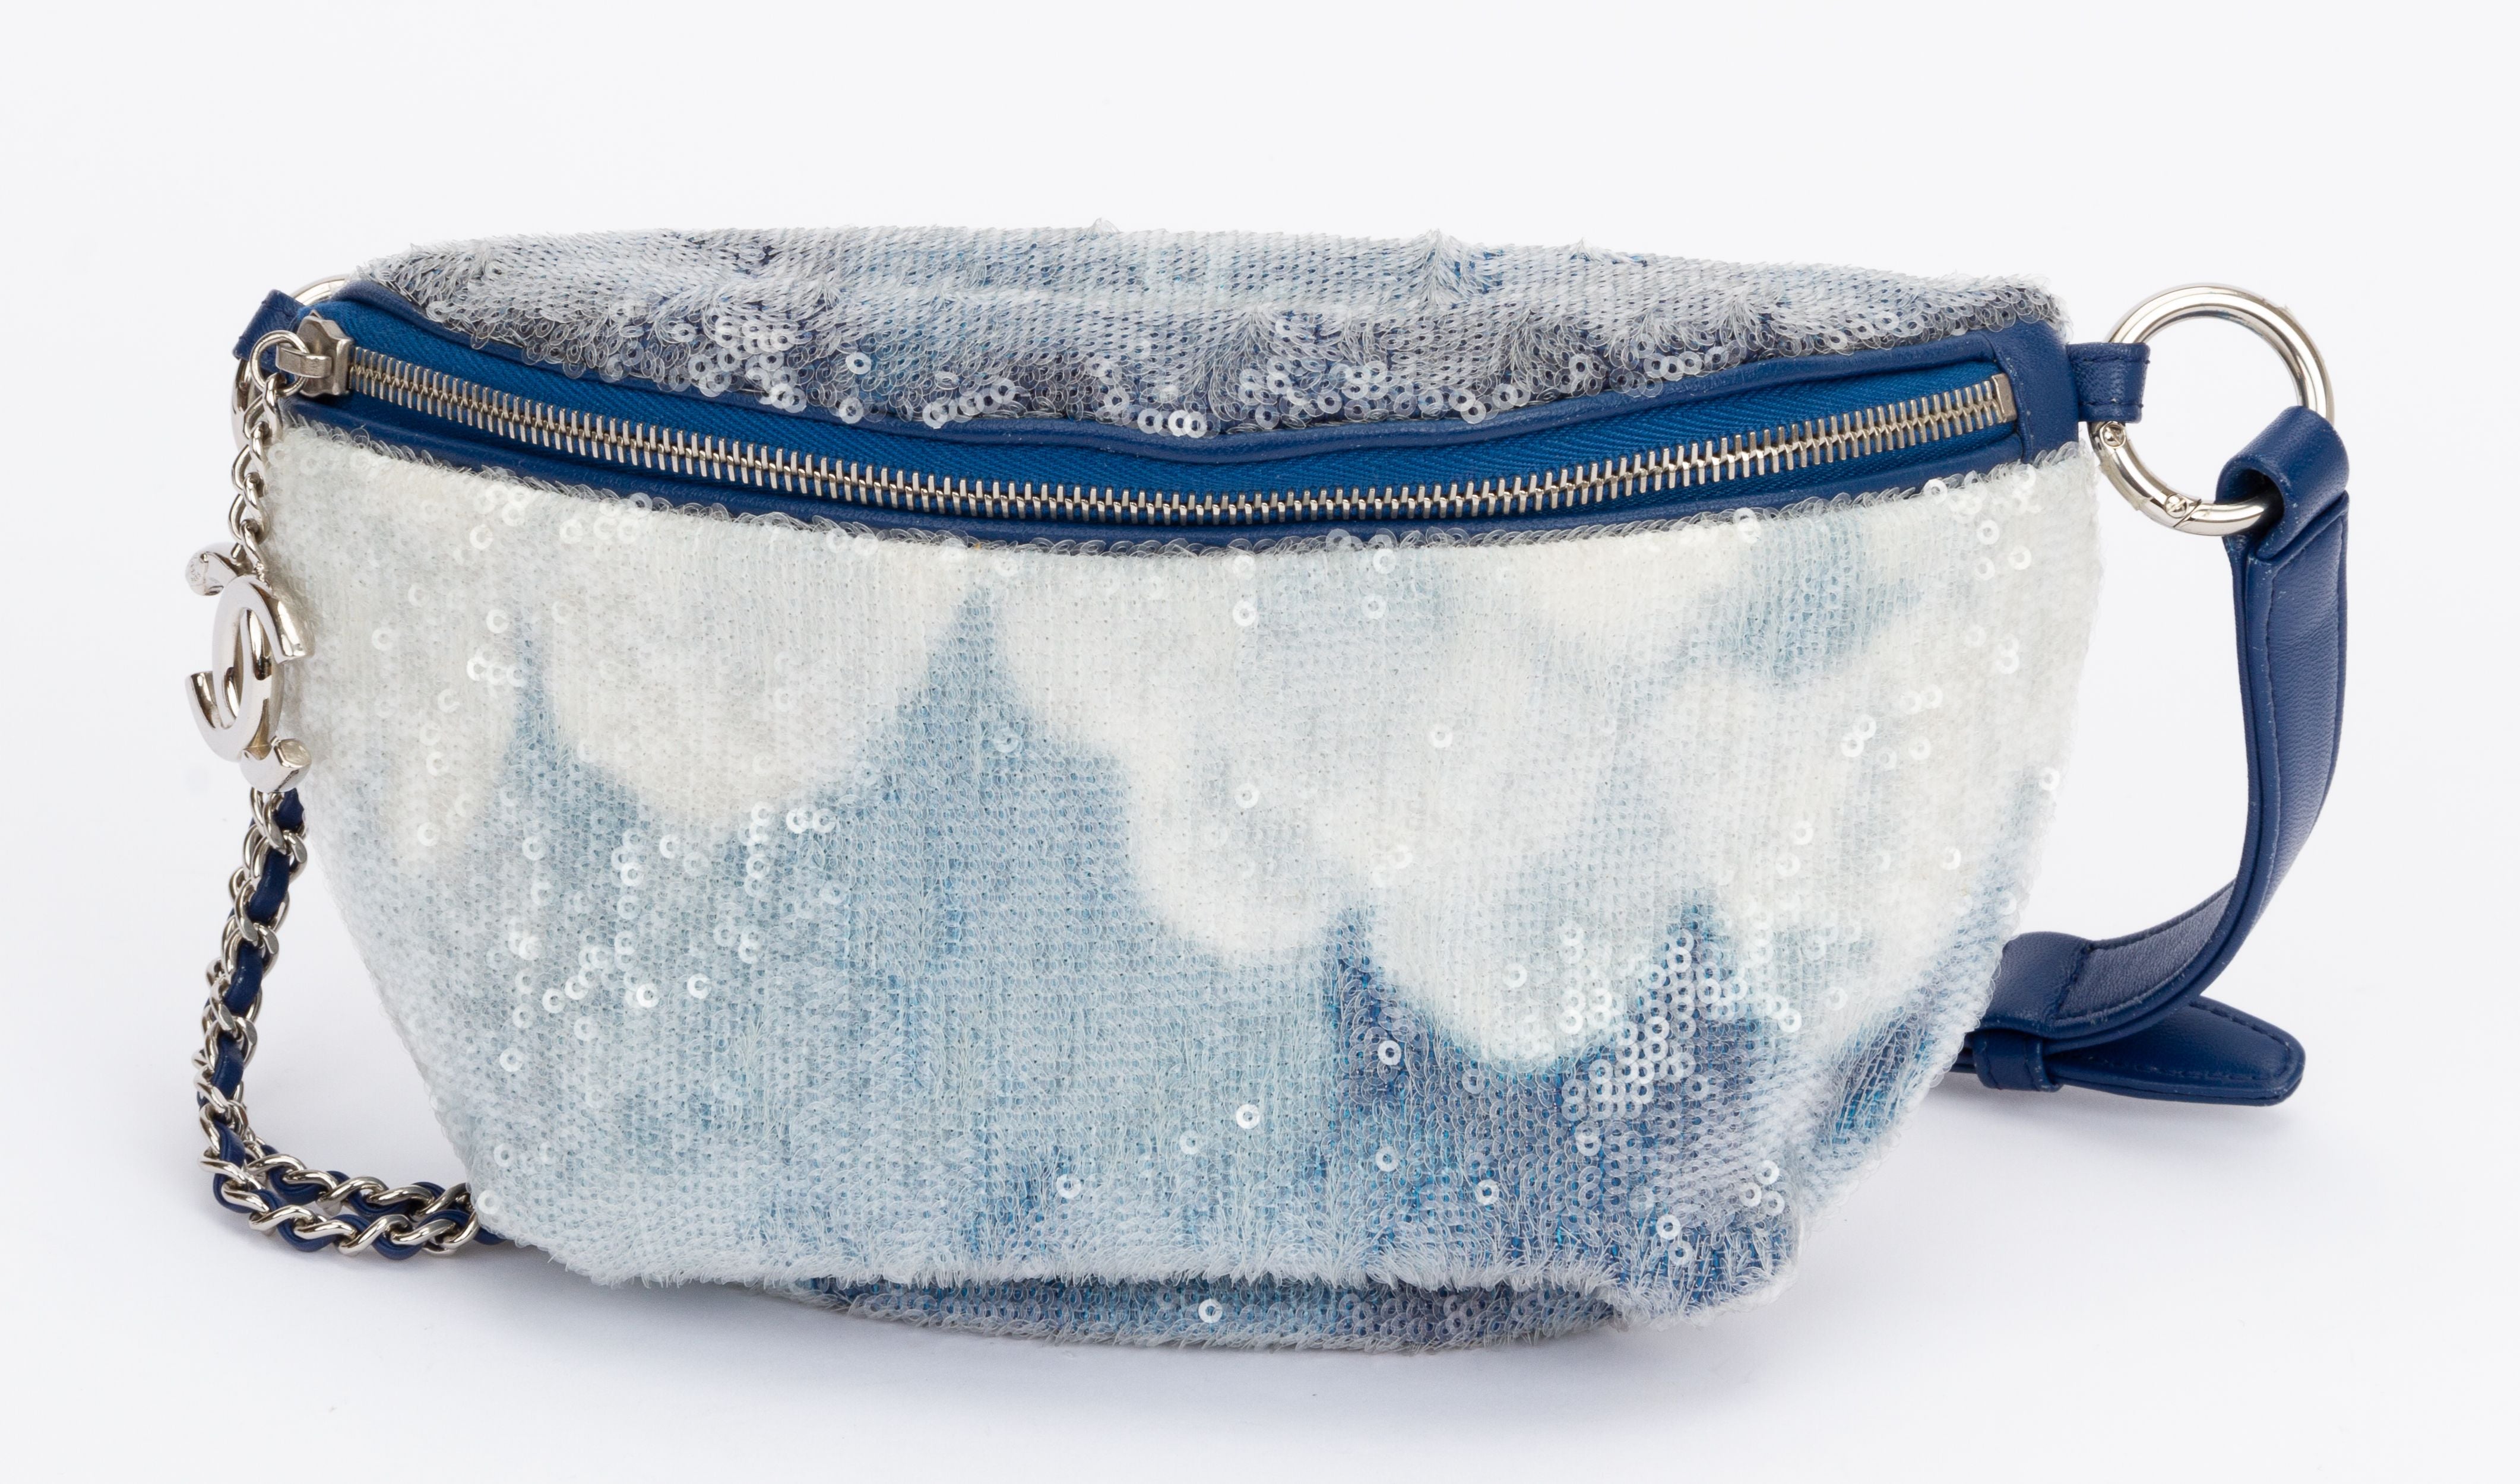 Chanel Sequin Fanny Pack Leather Waist Bag Blue/White